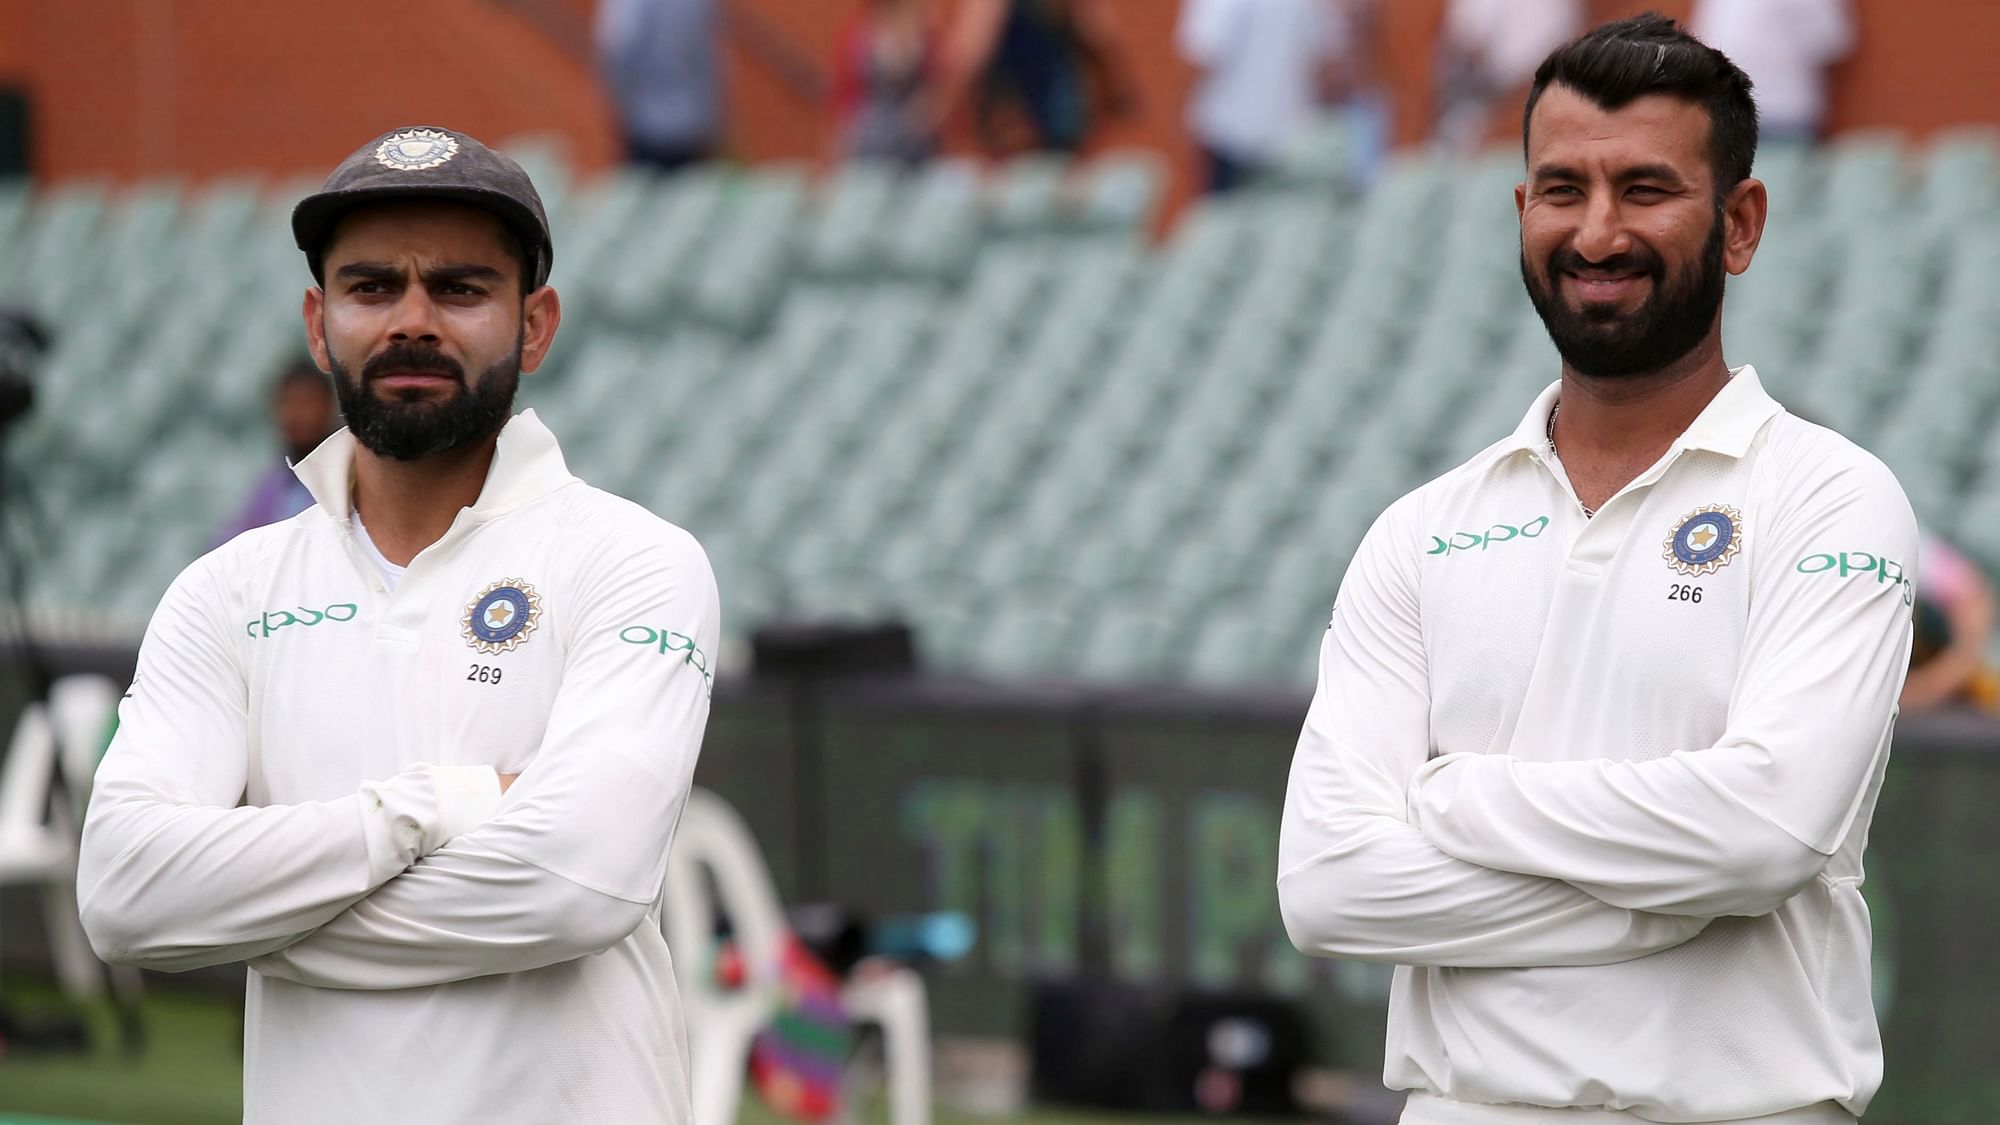 India were thrashed by 10 wickets in the opening Test at the Basin Reverse, failing to go past 200 in both their innings on seam-friendly conditions.